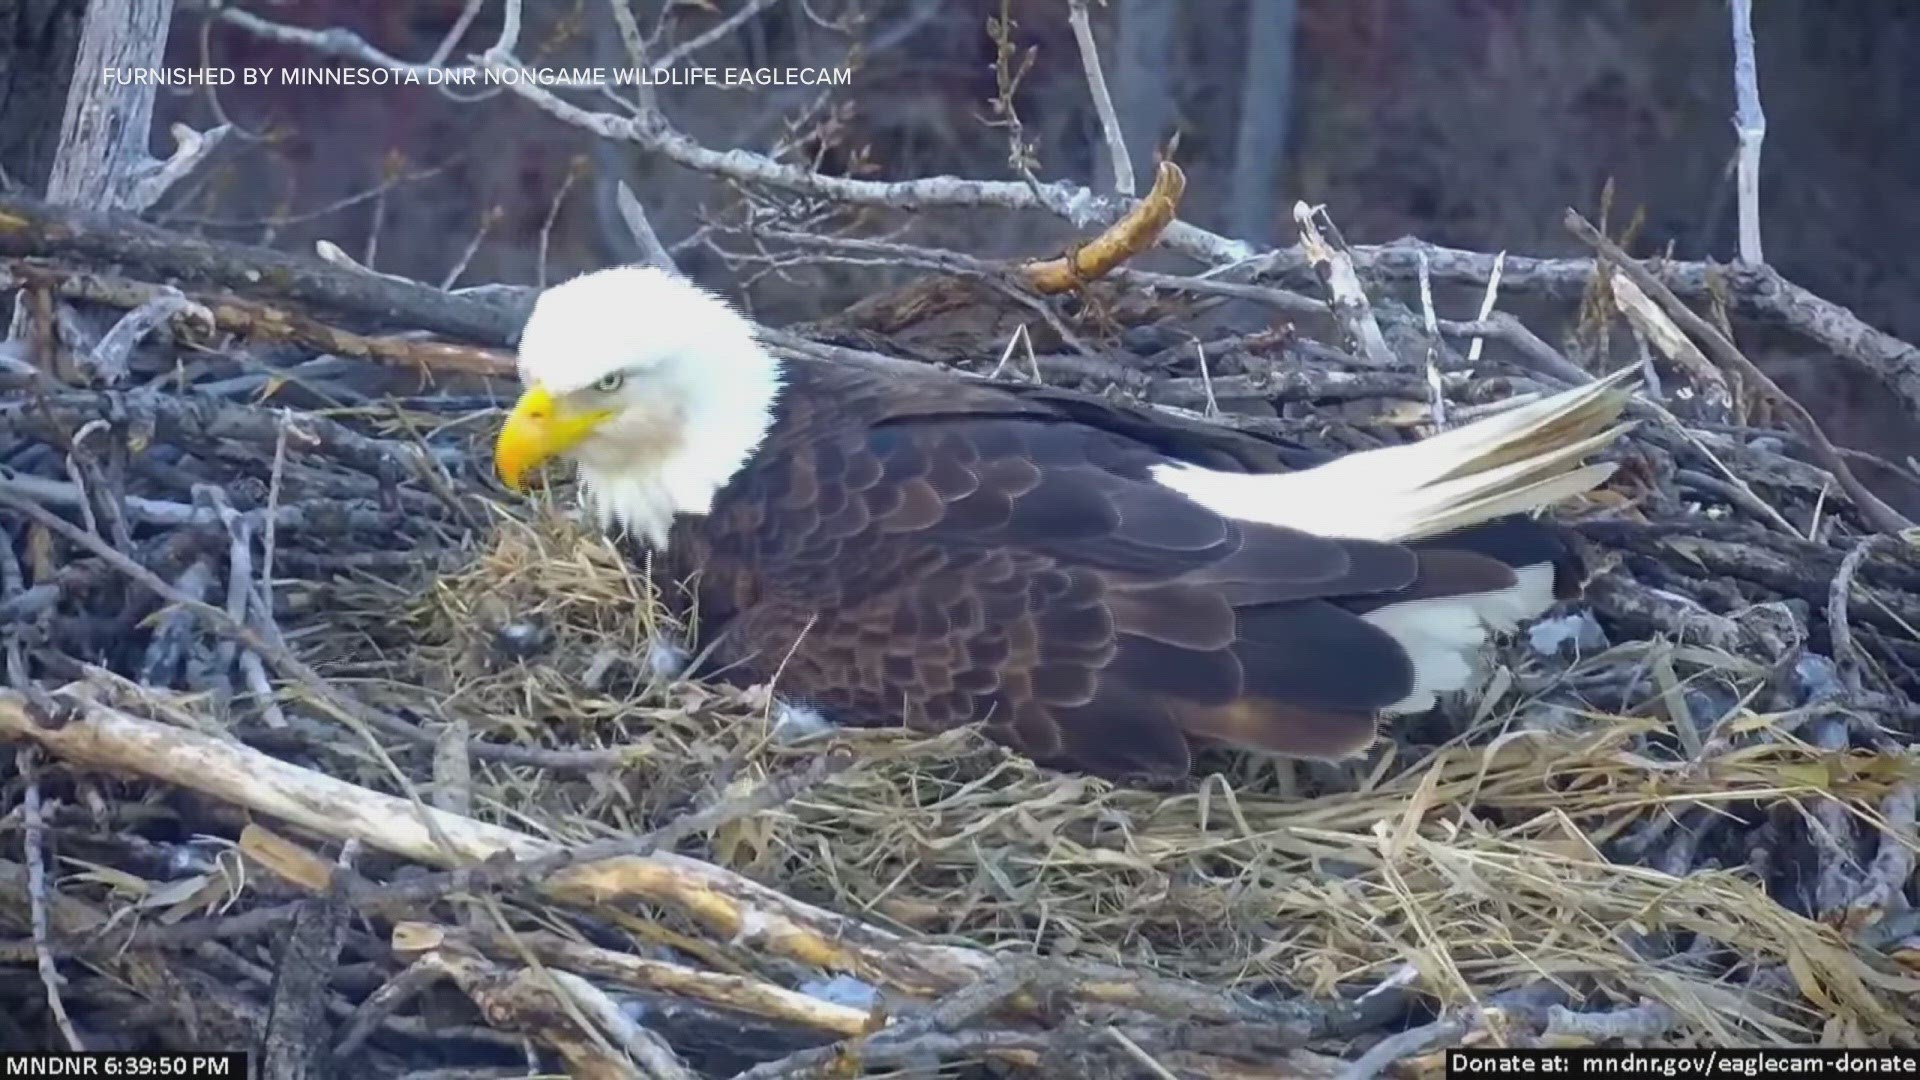 EagleCam viewers spotted the lone egg open and the movement of a fuzzy eaglet under its parent.